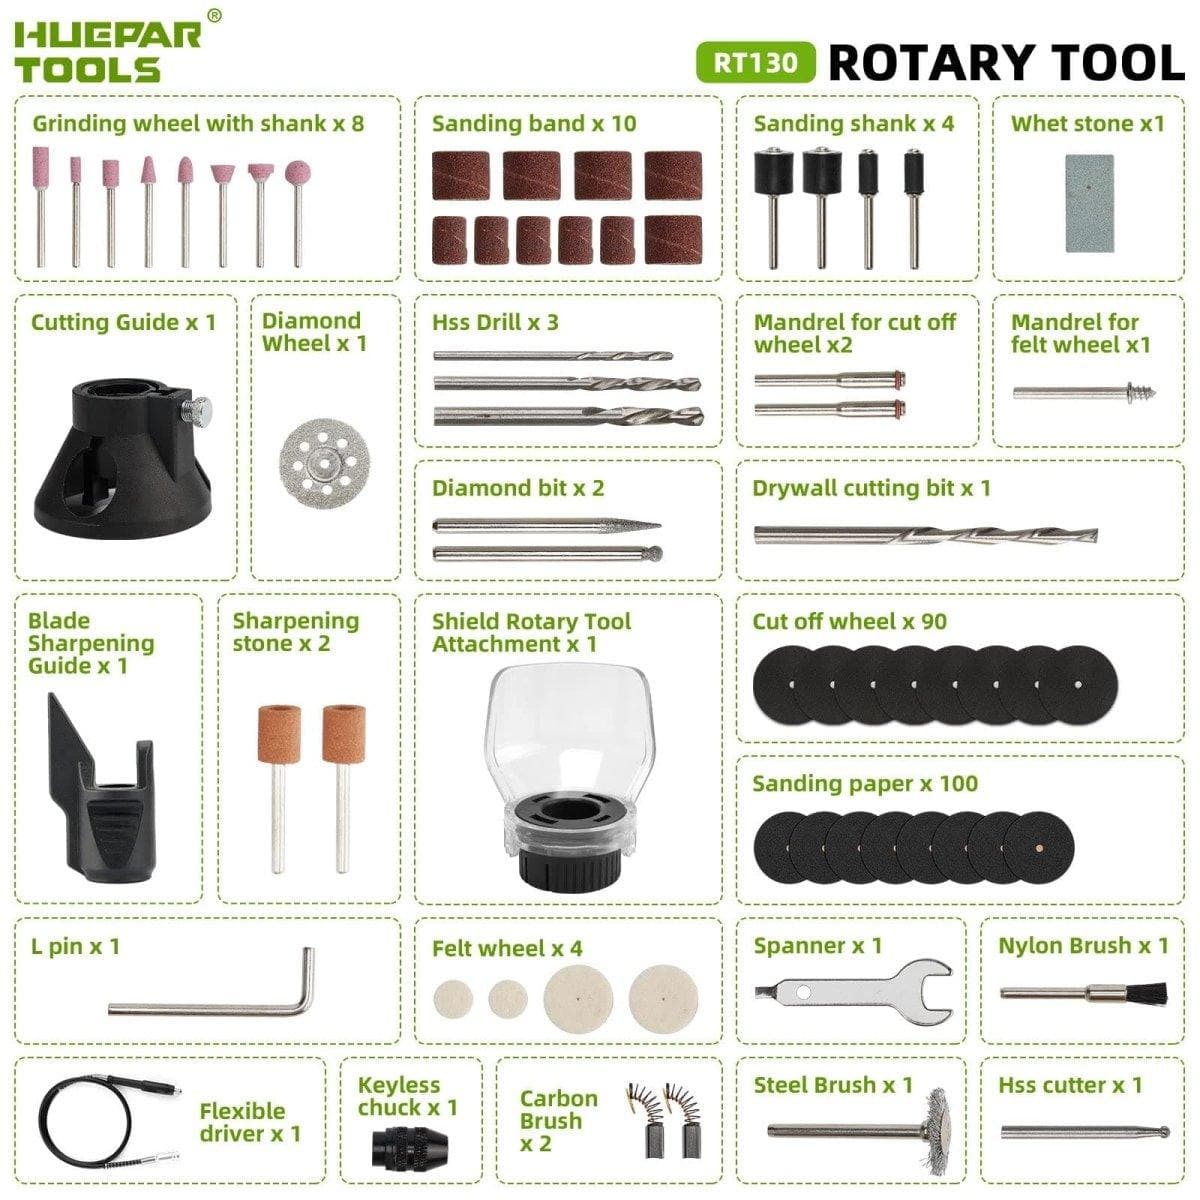 Huepar RT130 Rotary Tool Kit with Flex Shaft, 235pcs Accessories, MultiPro Keyless Chuck, and 6 Variable Speeds ranging from 10000-35000RPM for Crafting and DIY Projects8